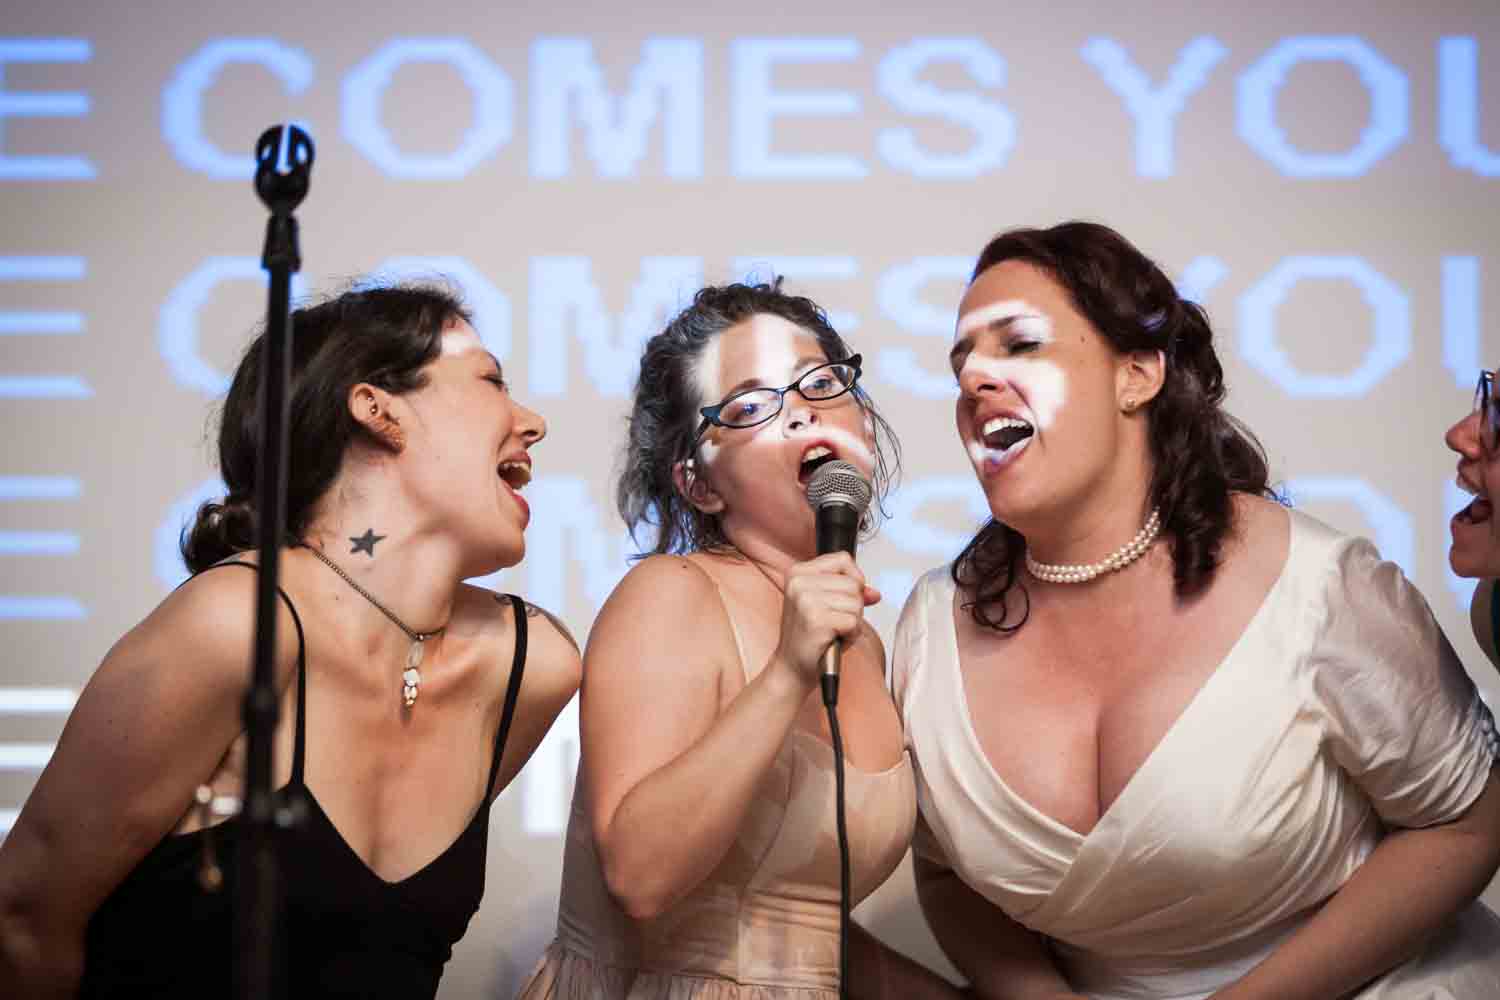 Bride singing karaoke with two female guests at a DUMBO wedding